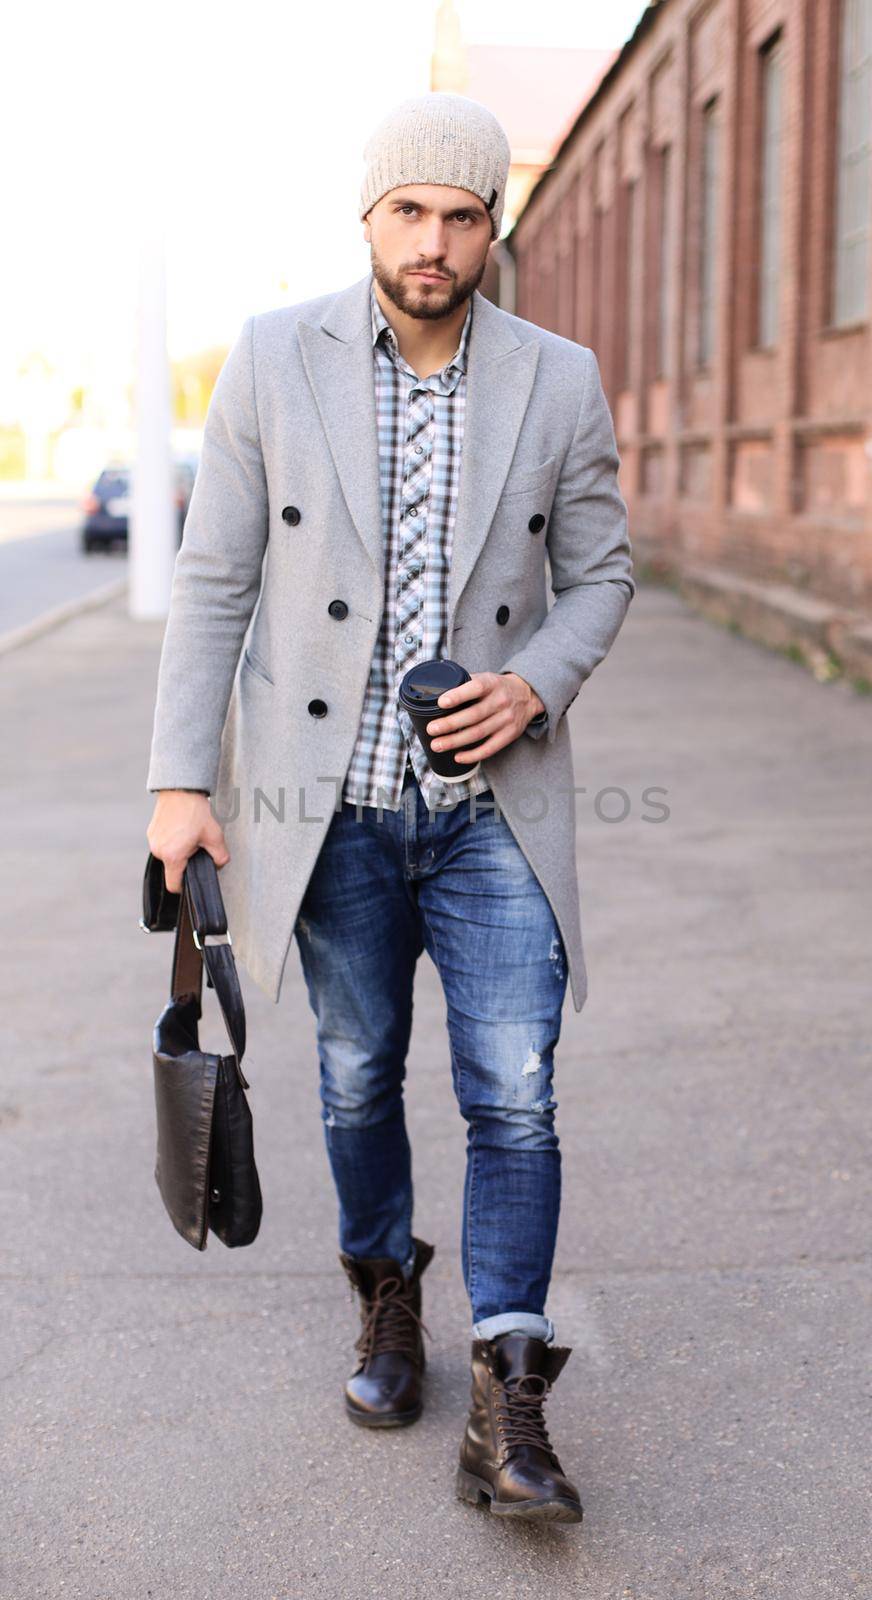 City life. Stylish young man in grey coat and hat walking on the street in the city